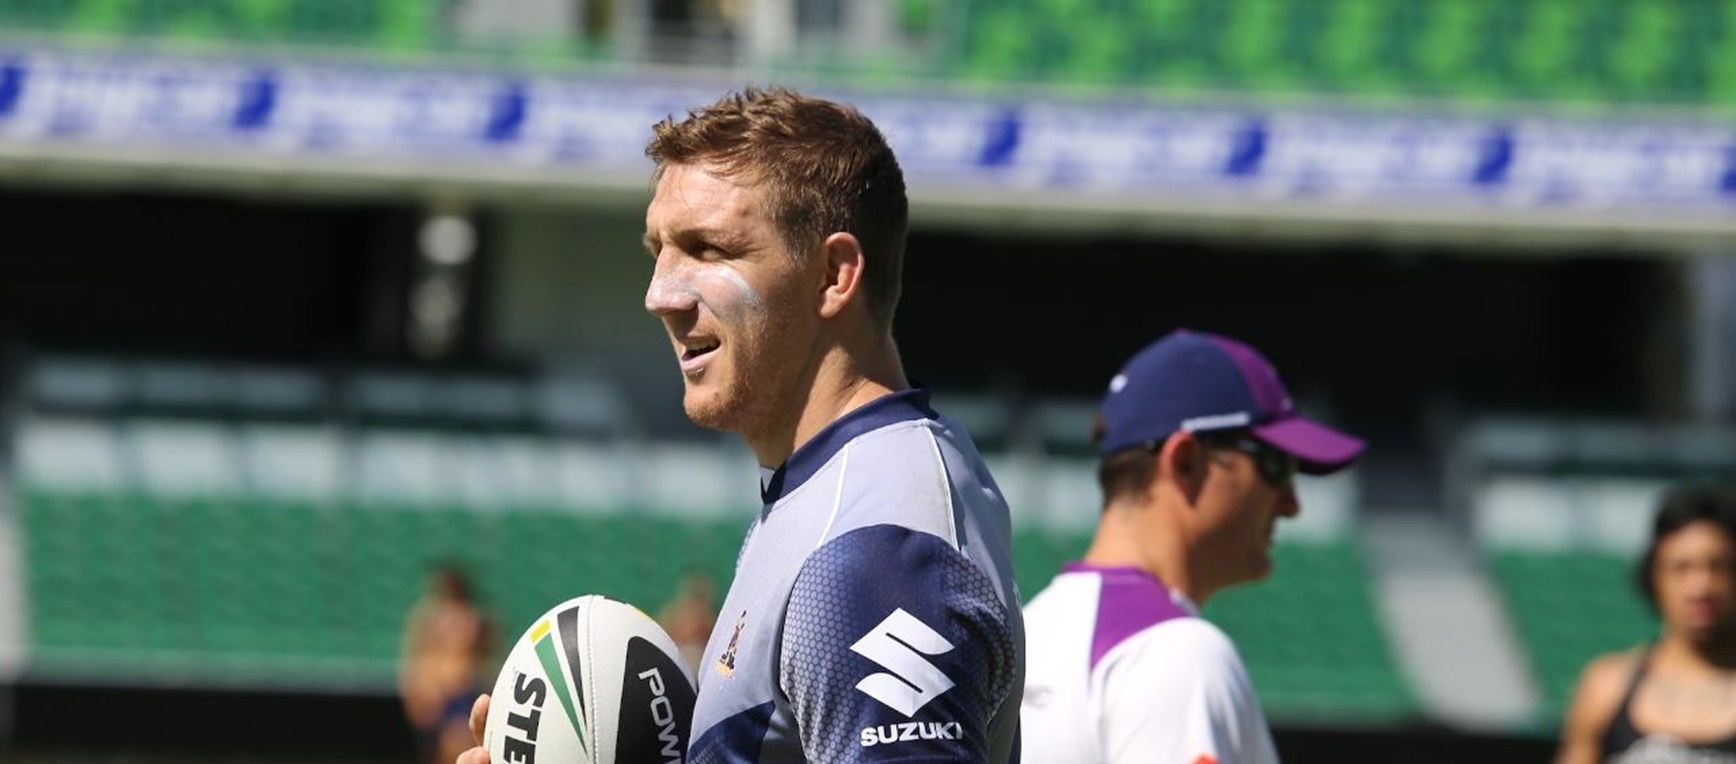 In pictures: Perth training